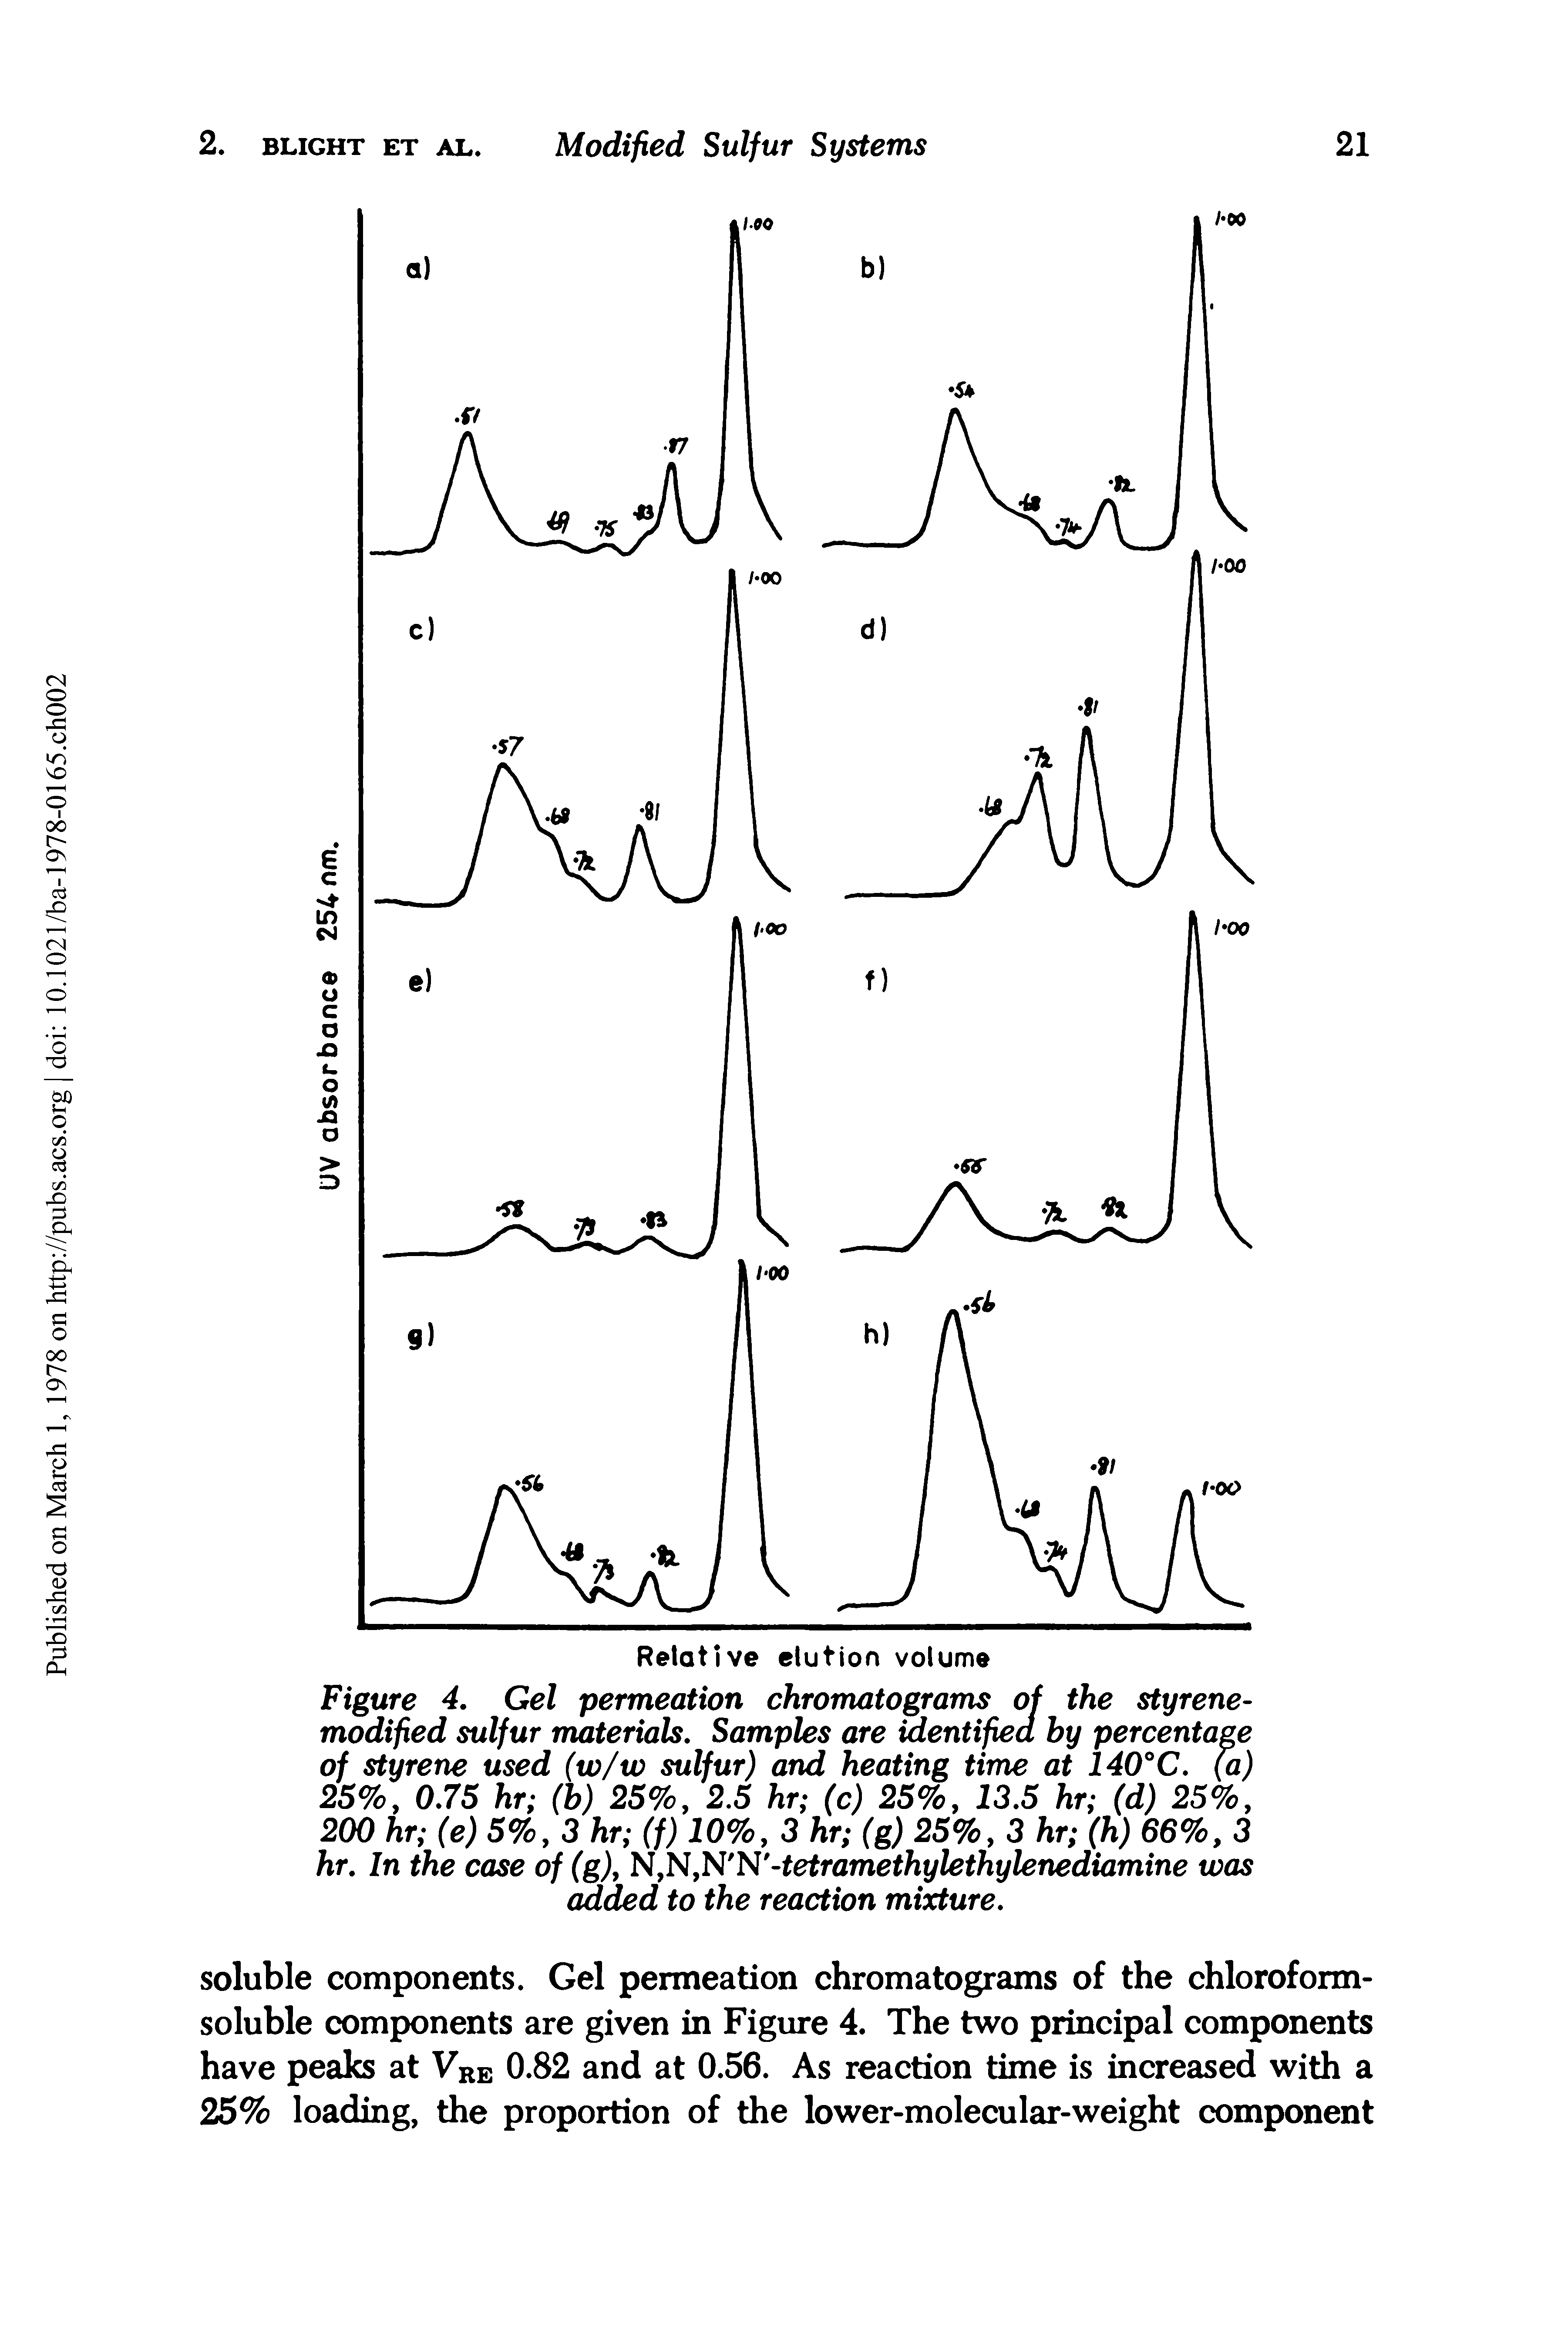 Figure 4. Gel permeation chromatograms of the styrene-modified sulfur materials. Samples are identified by percentage of styrene used (w/w sulfur) and heating time at 140°C. (a)...